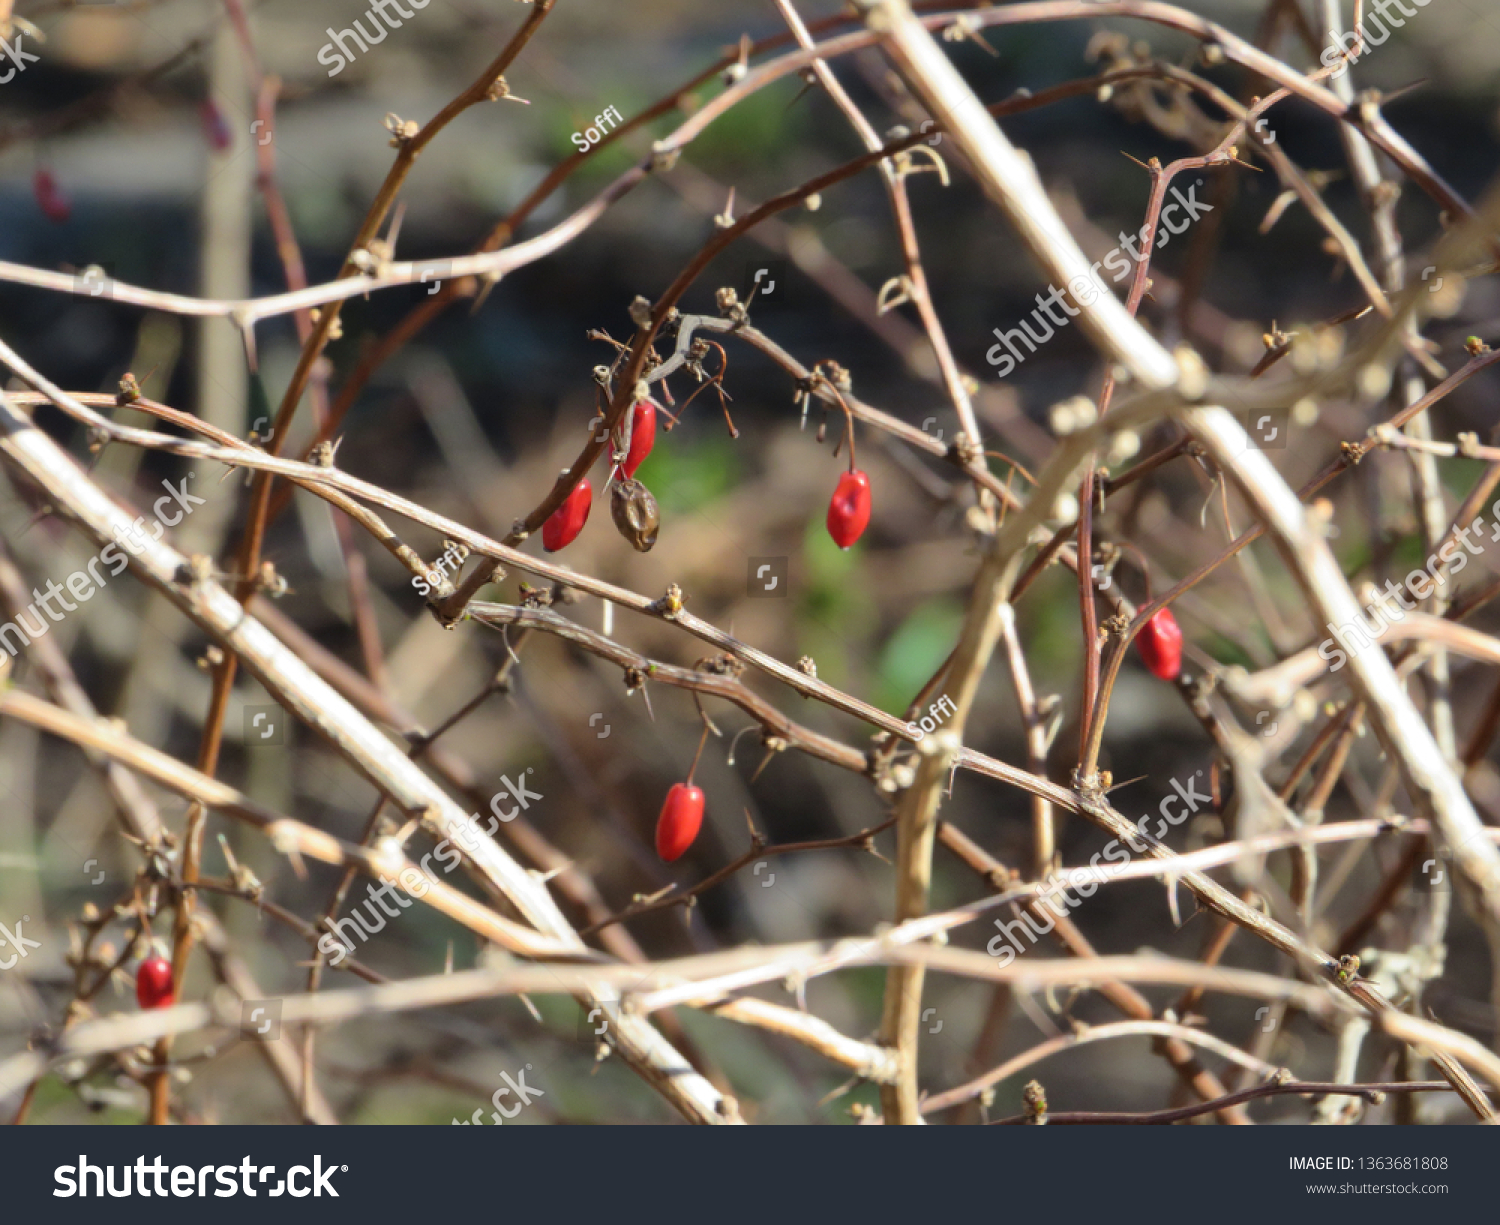 Abstract image of the branches and berries of barberry in late autumn. #1363681808